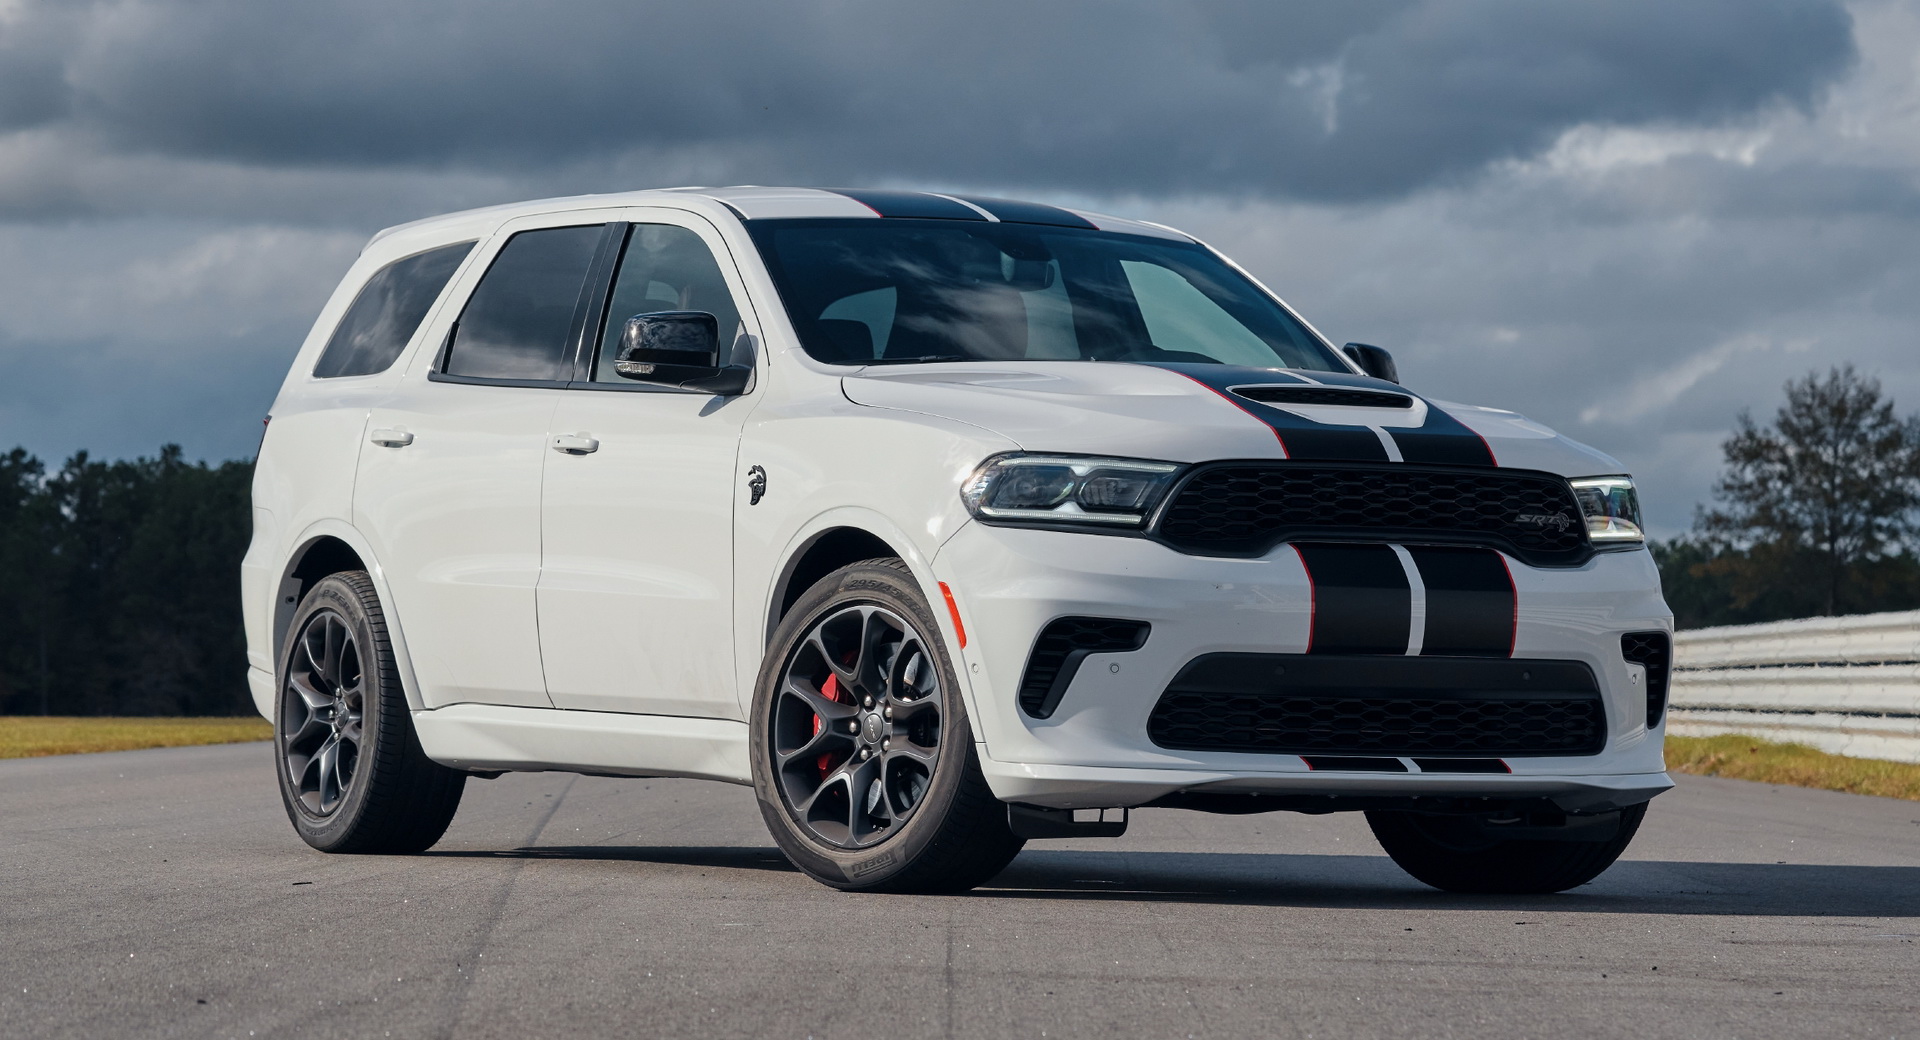 Dodge Durango SRT Hellcat Is Officially Sold Out After Less Than 3